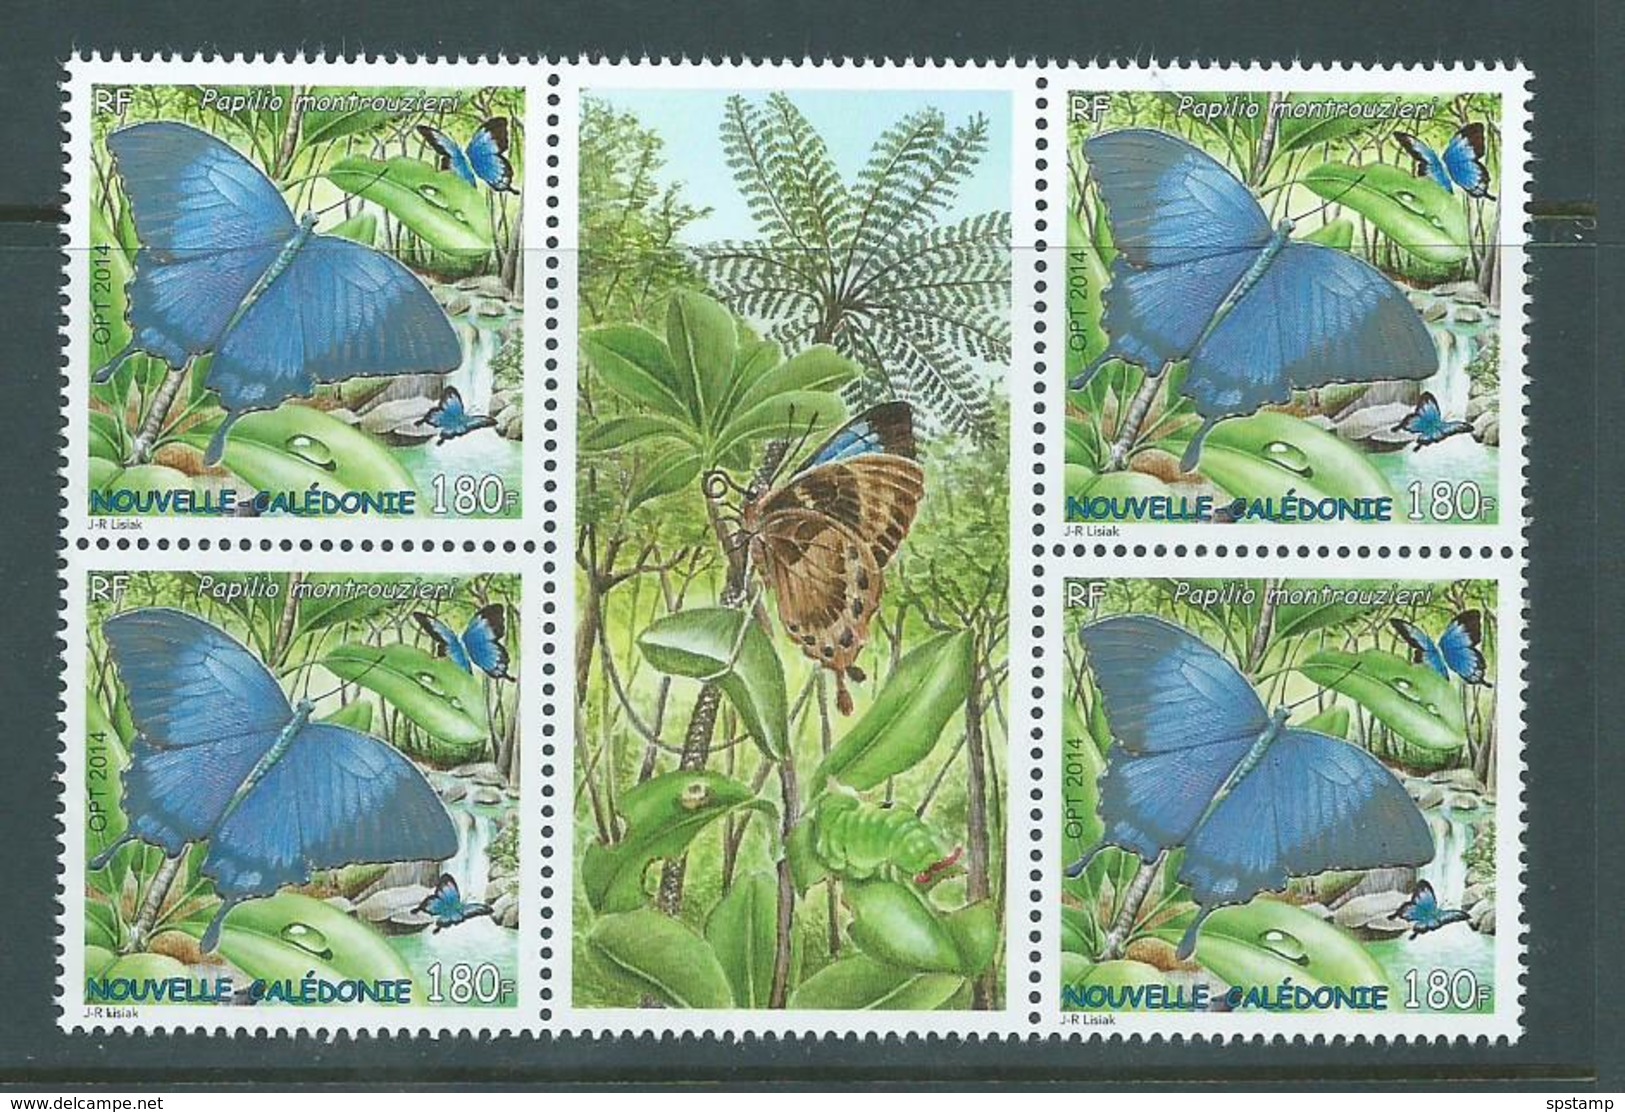 New Caledonia 2014 Swallowtail Butterfly Papilio 180 Fr Block 4 With Central Label MNH - Unused Stamps